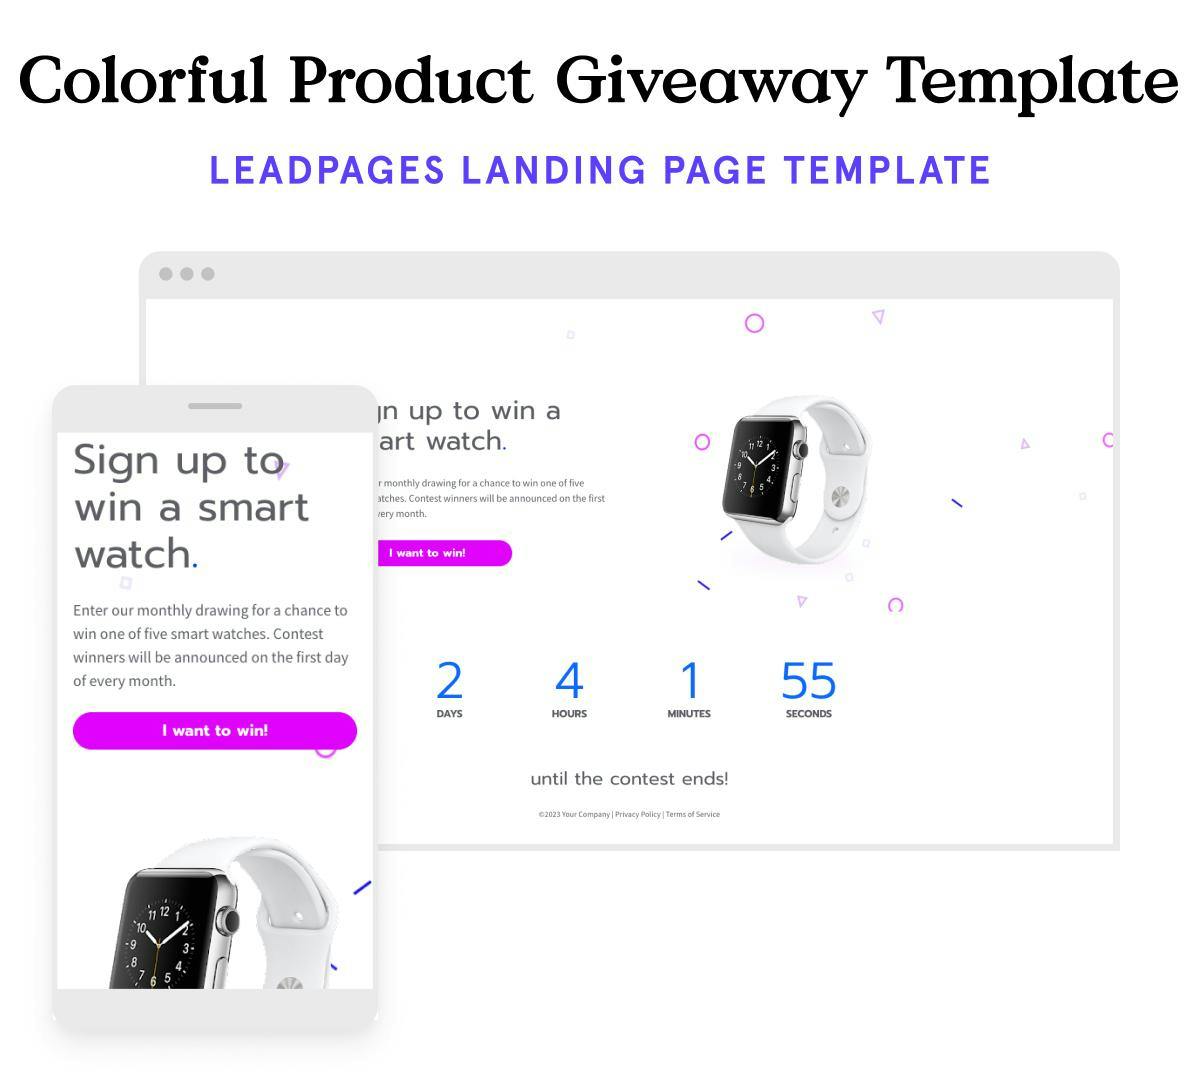 Product giveaway landing page template